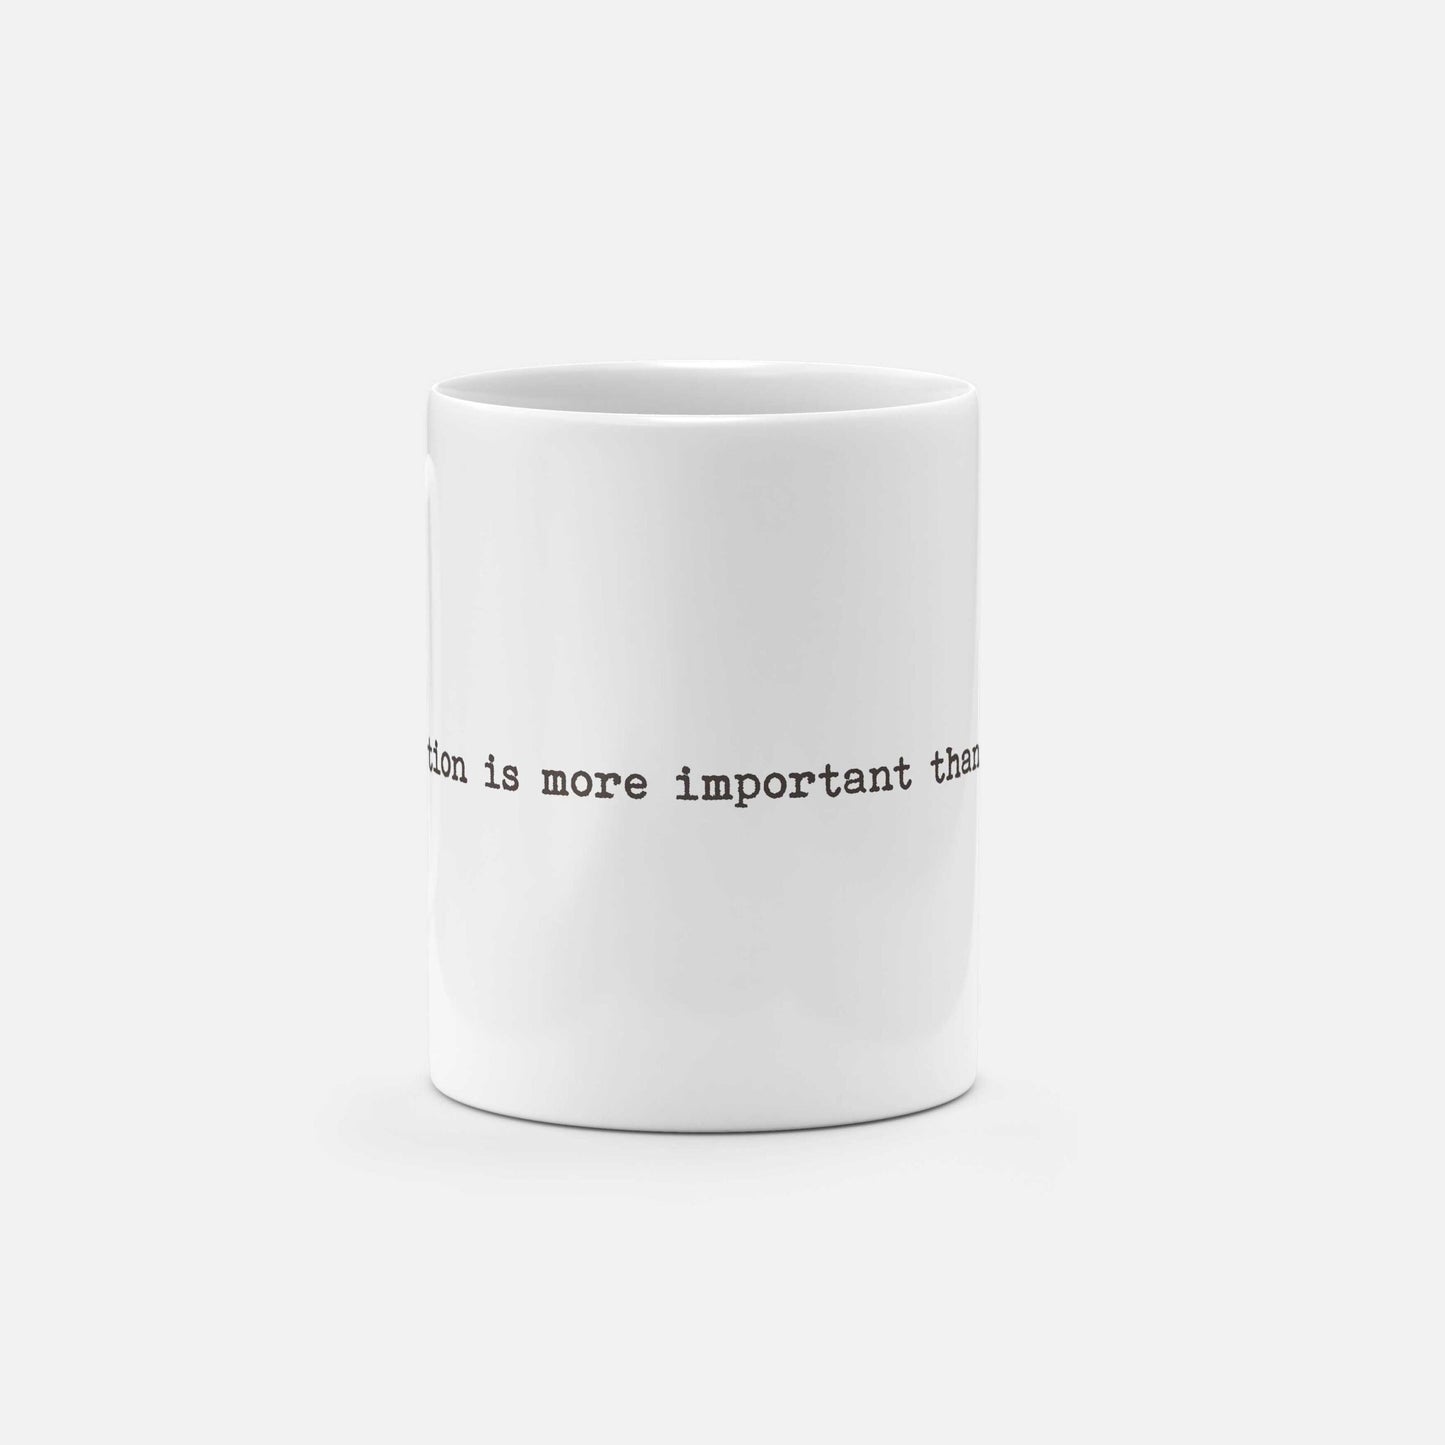 Your Direction is More Important than Your Speed 11oz Mug The Design Craft